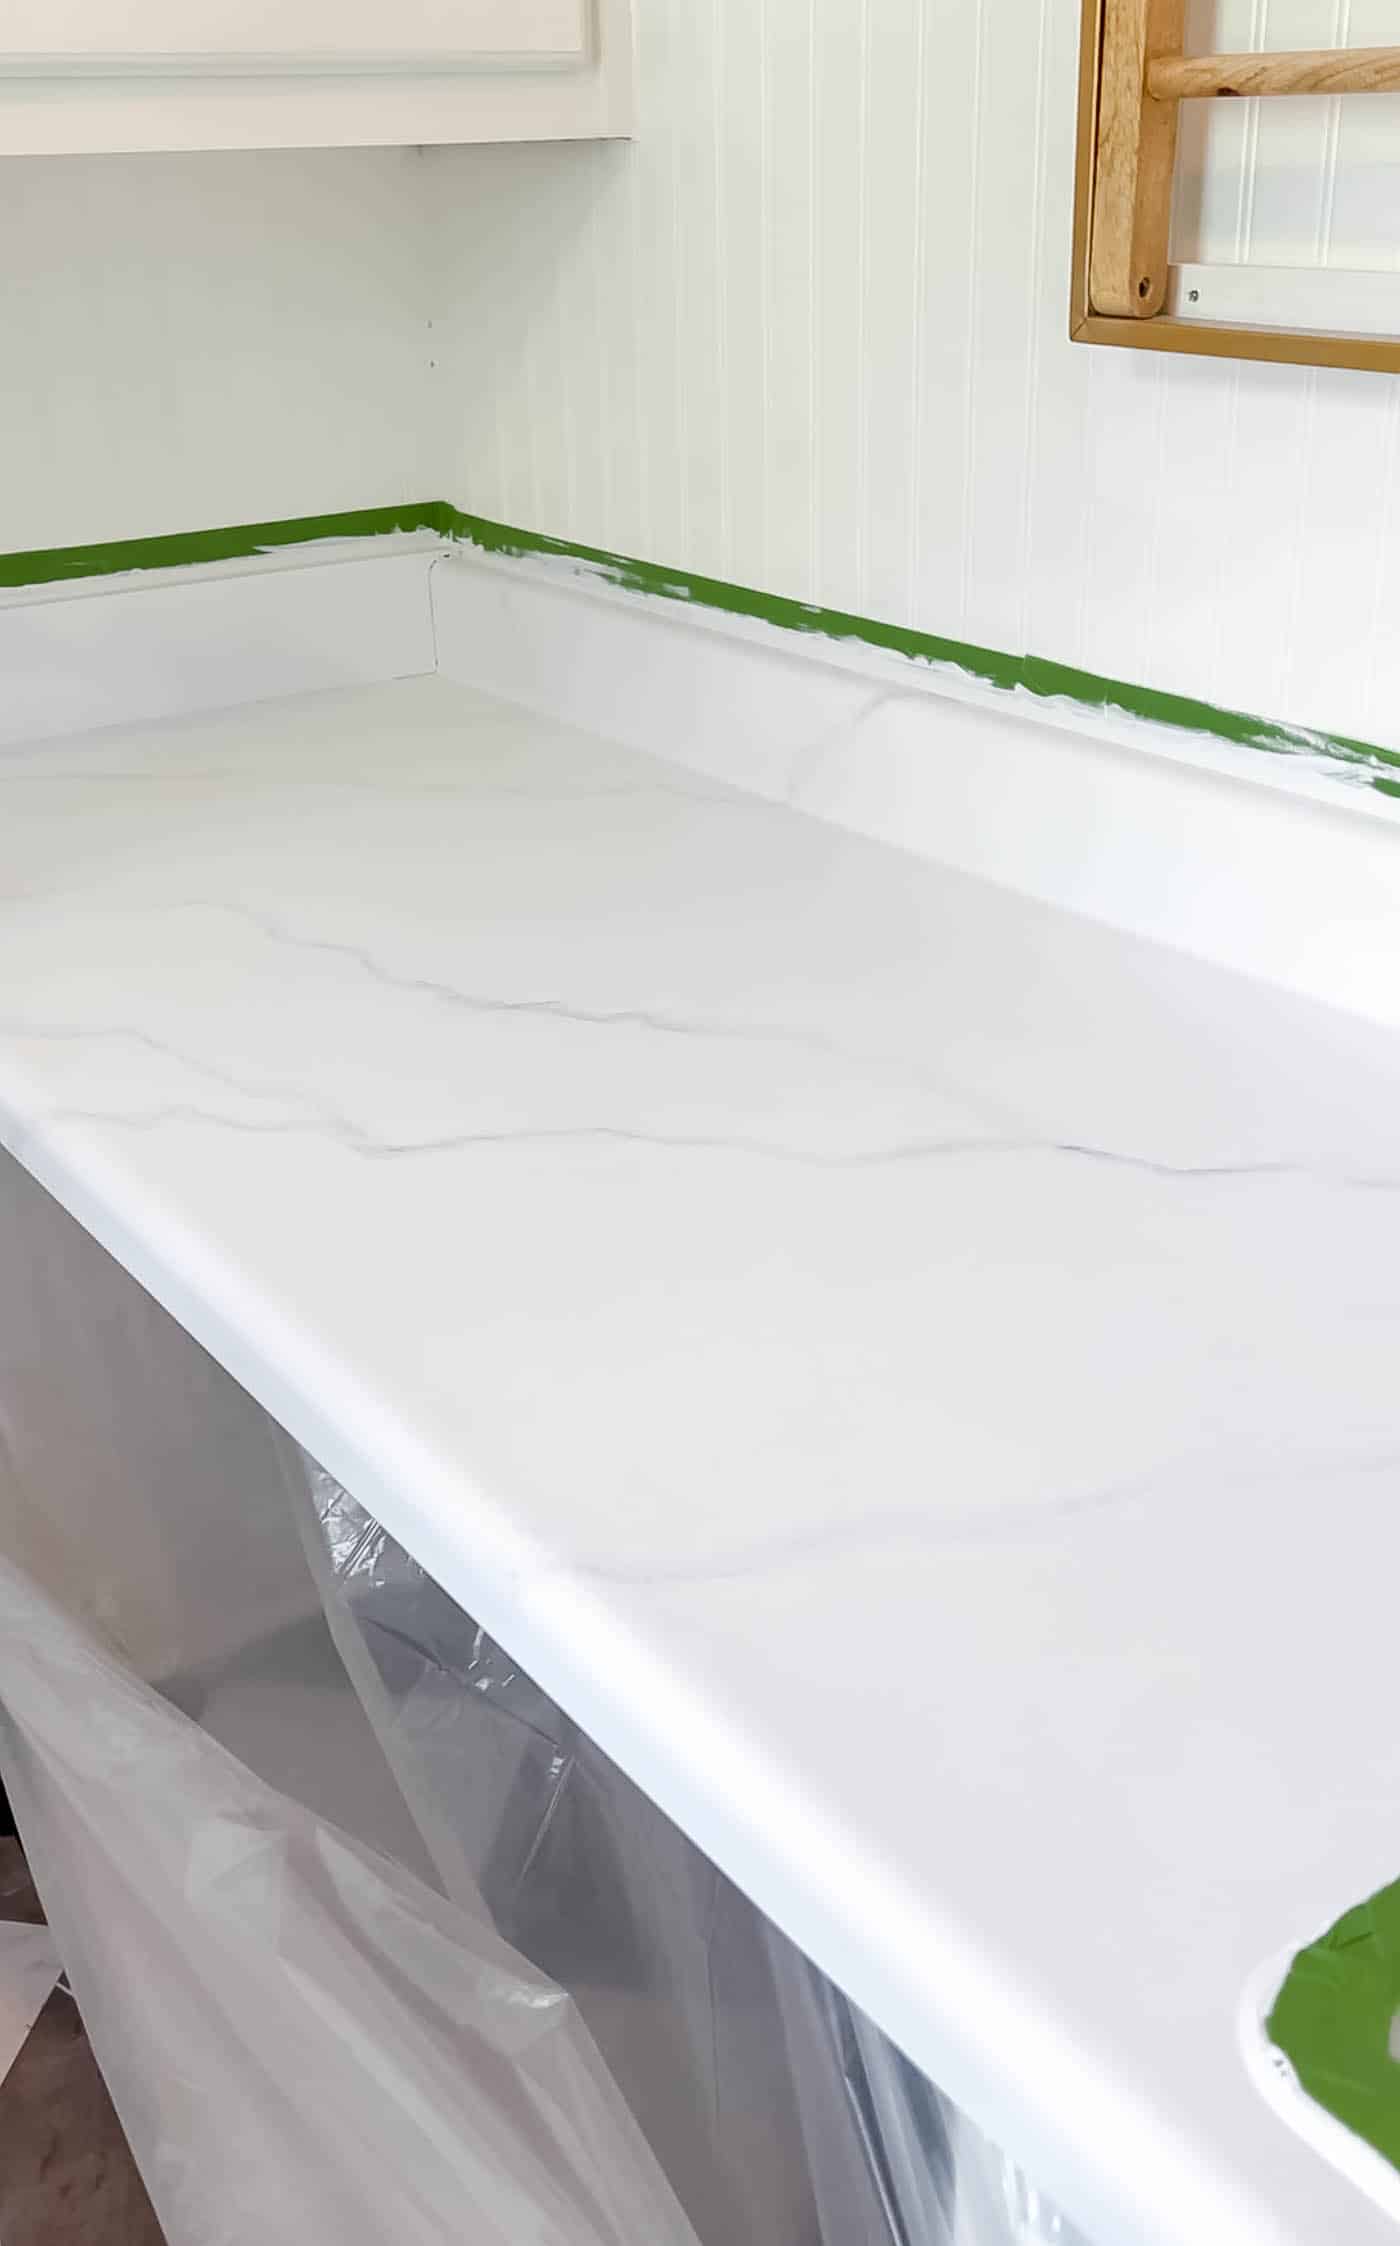 How to Paint Countertops to Look Like Marble